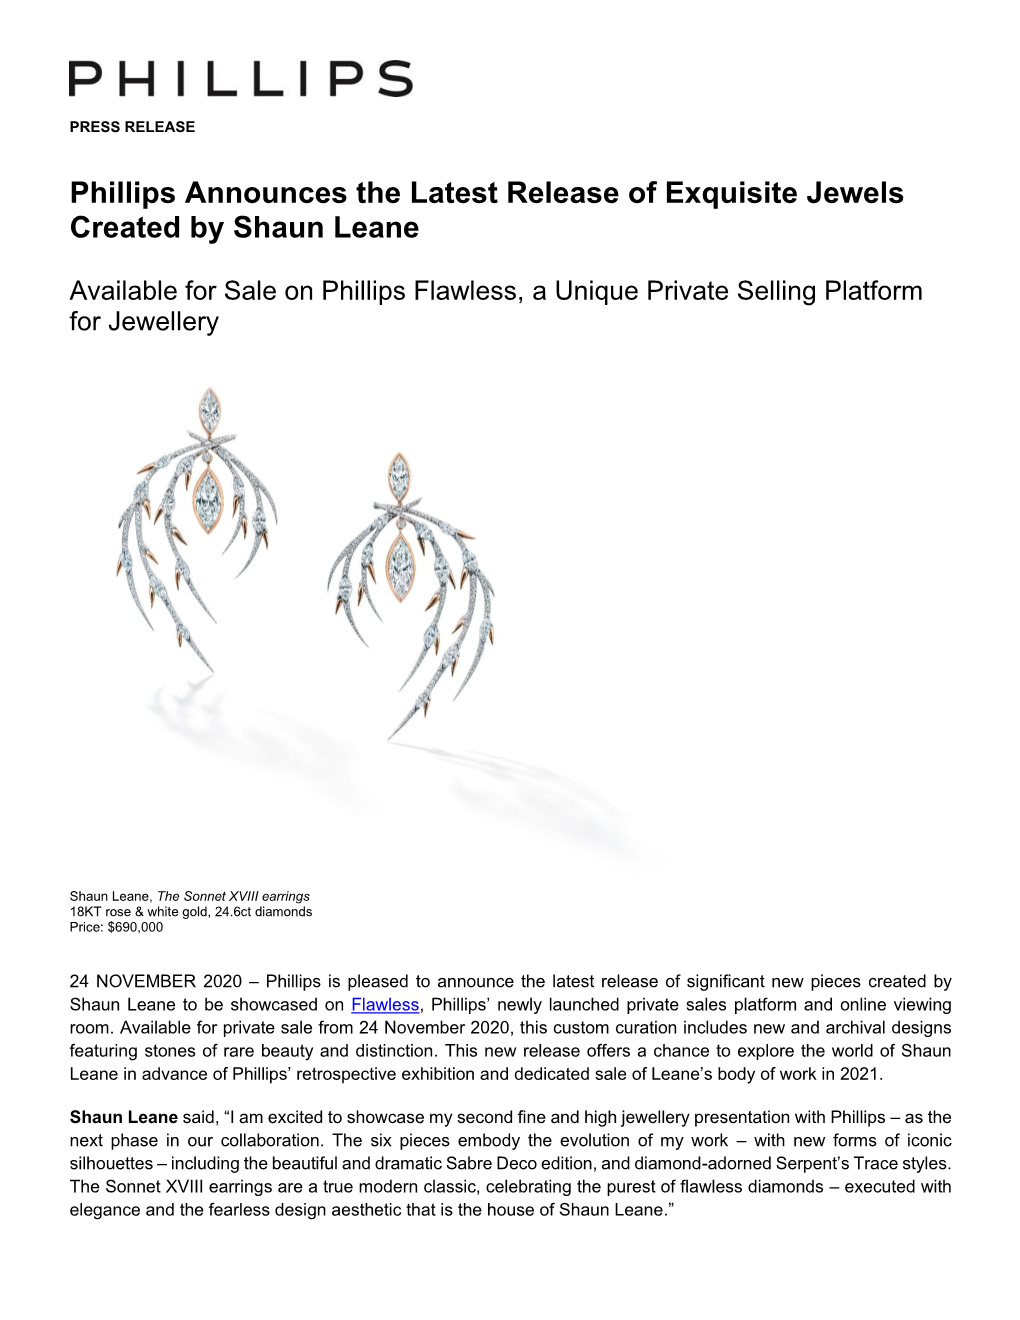 Phillips Announces the Latest Release of Exquisite Jewels Created by Shaun Leane